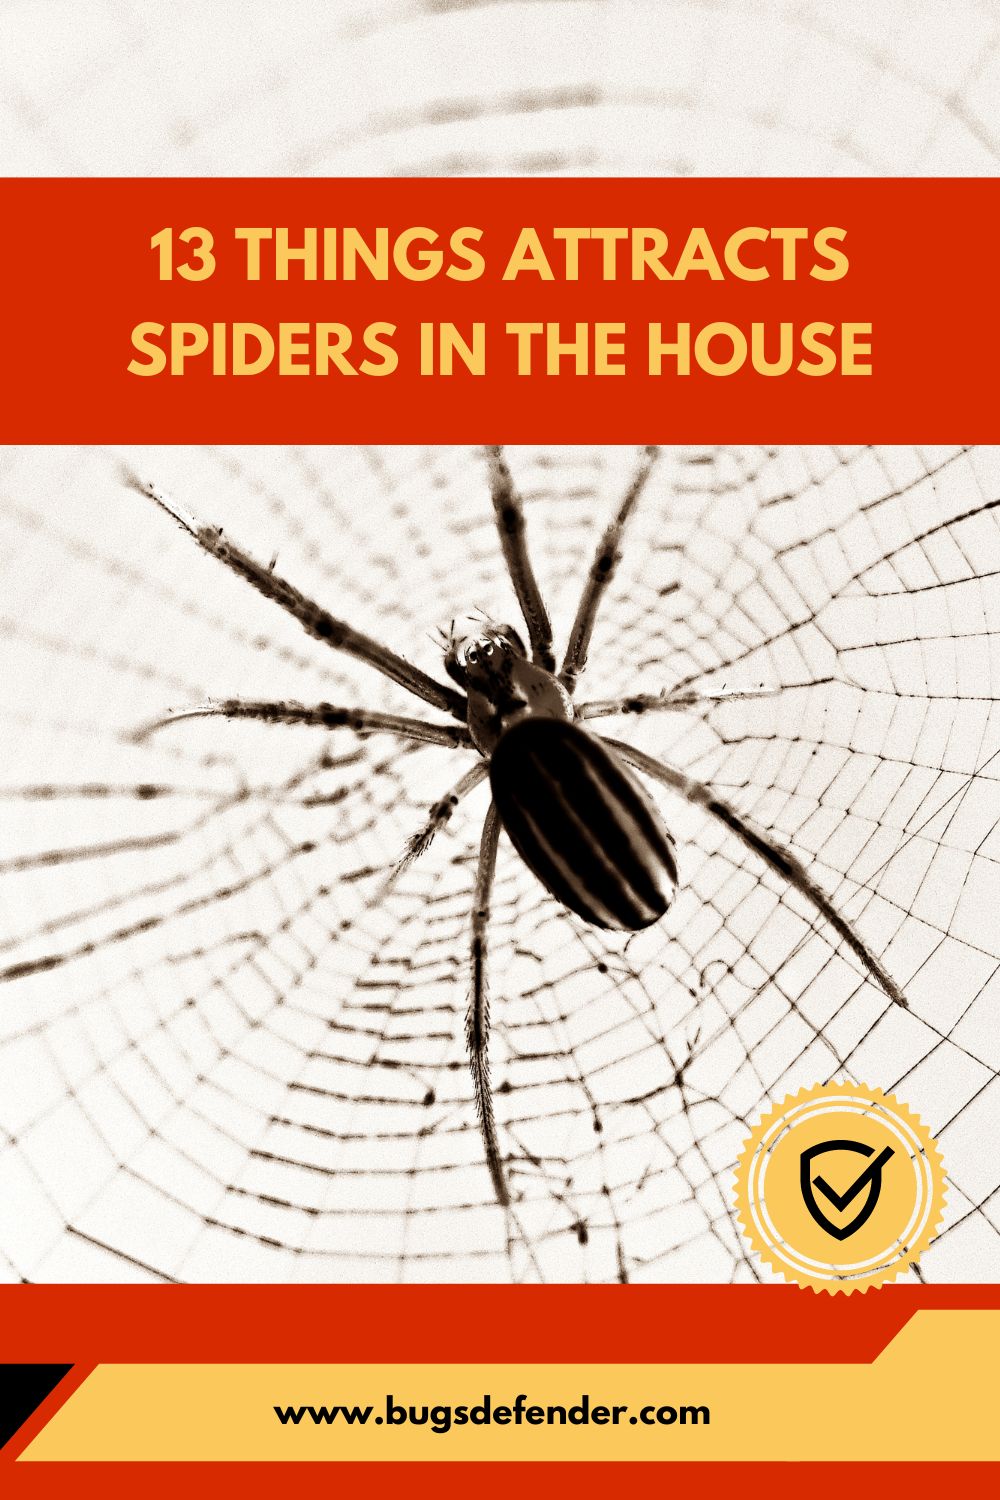 13 Things Attracts Spiders in the House pin 2